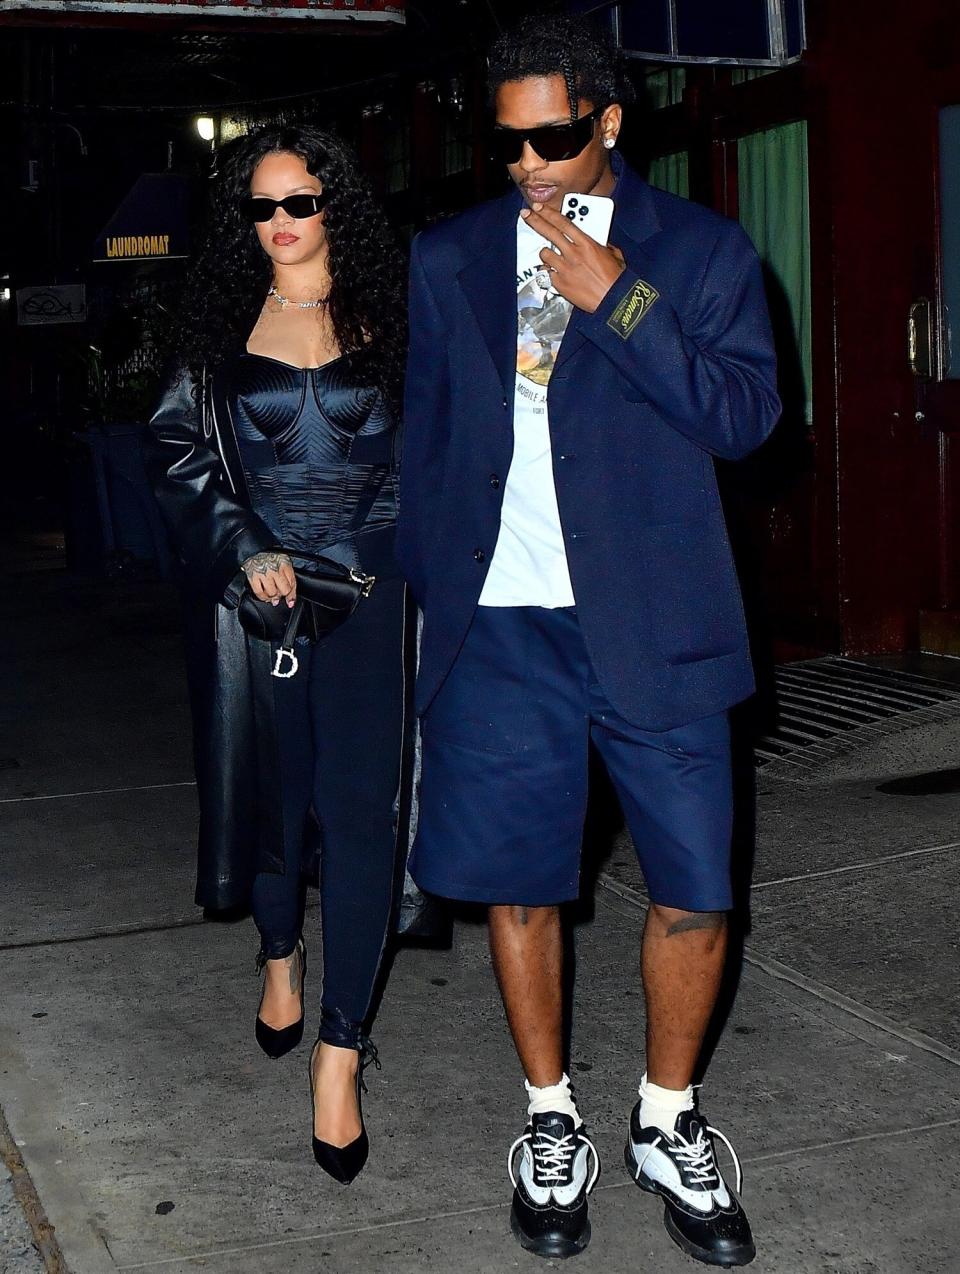 *EXCLUSIVE* Rihanna and ASAP Rocky go for a late-night dinner date in NYC